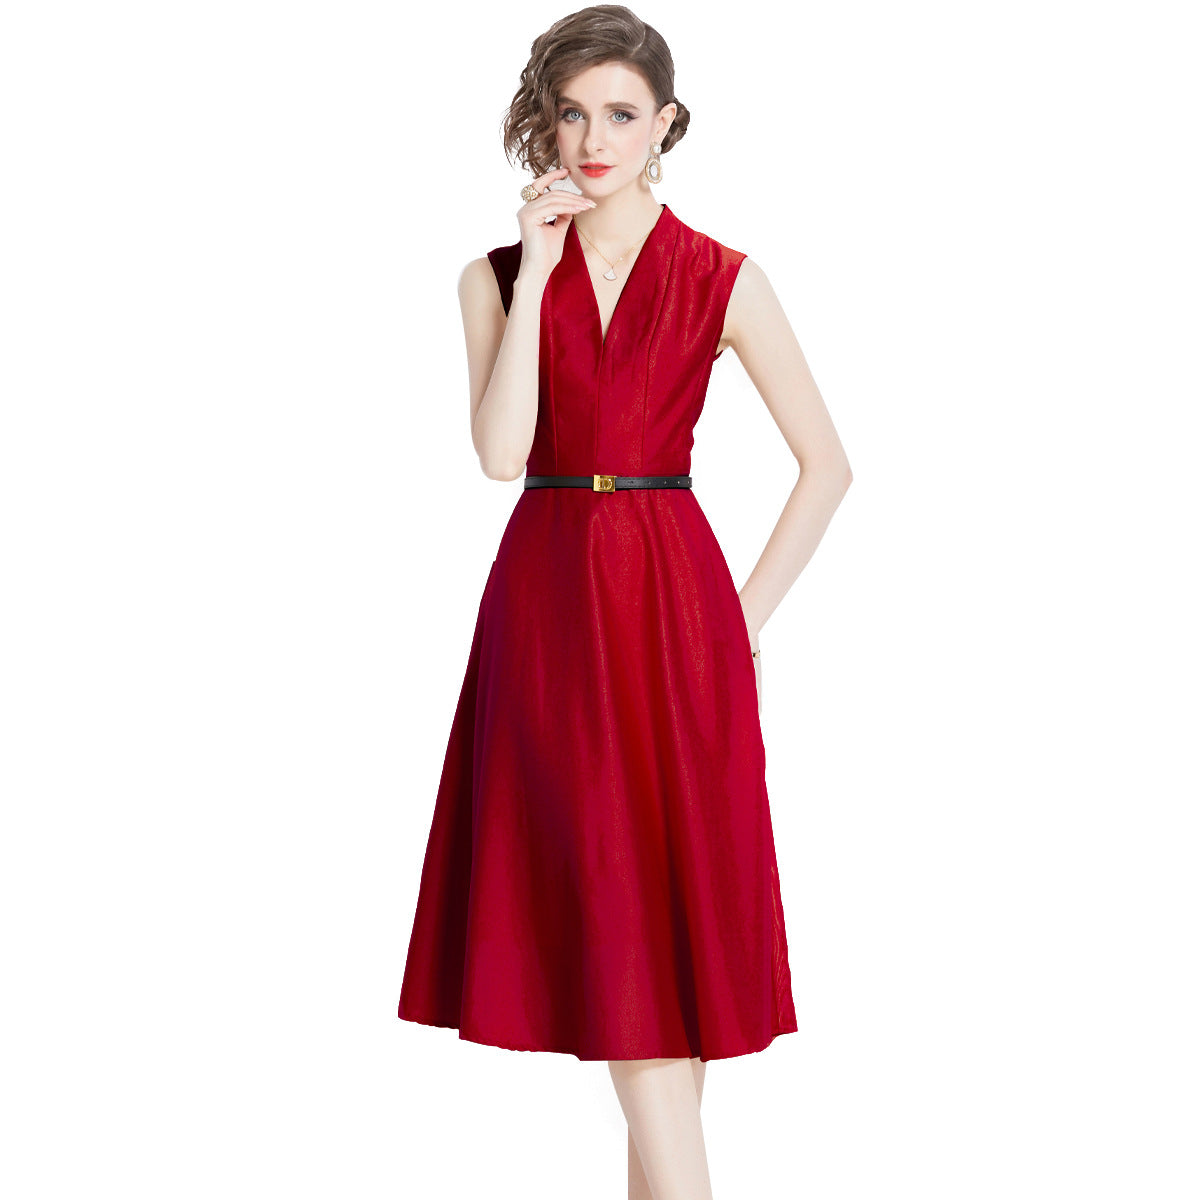 Young Adult Lady Like Woman Style Red Sleeveless Dress